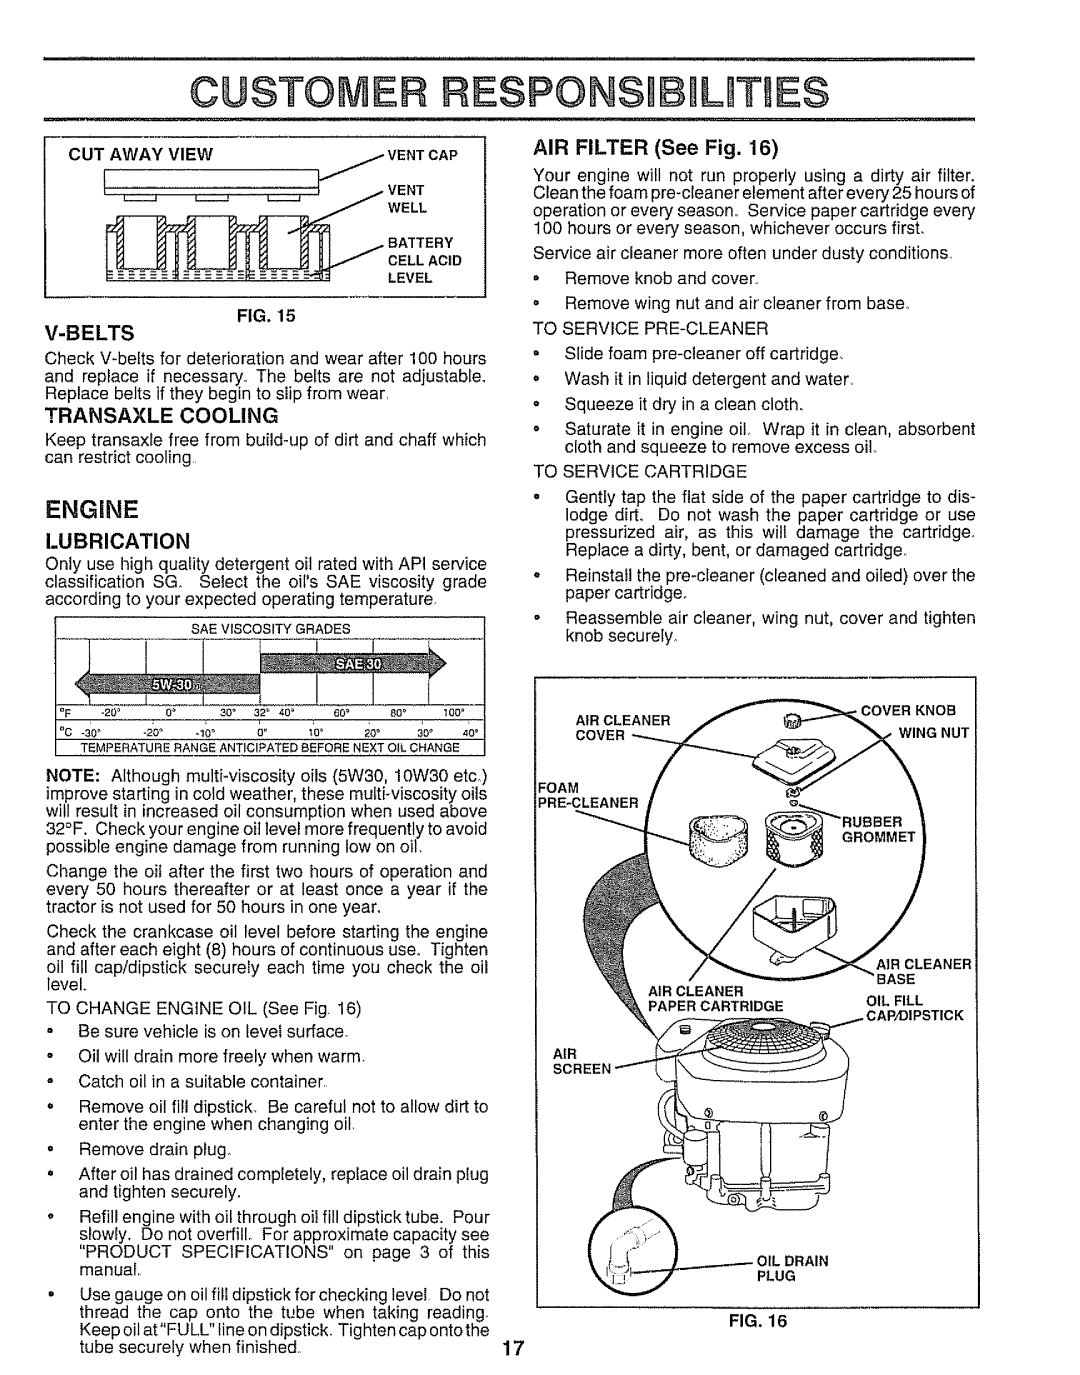 Sears 917.25545 Customer Respo, Battery, Engine, V-Belts, o -2oo .loo6 oo, AIR FILTER See Fig, Cut Away View, Ventcap 